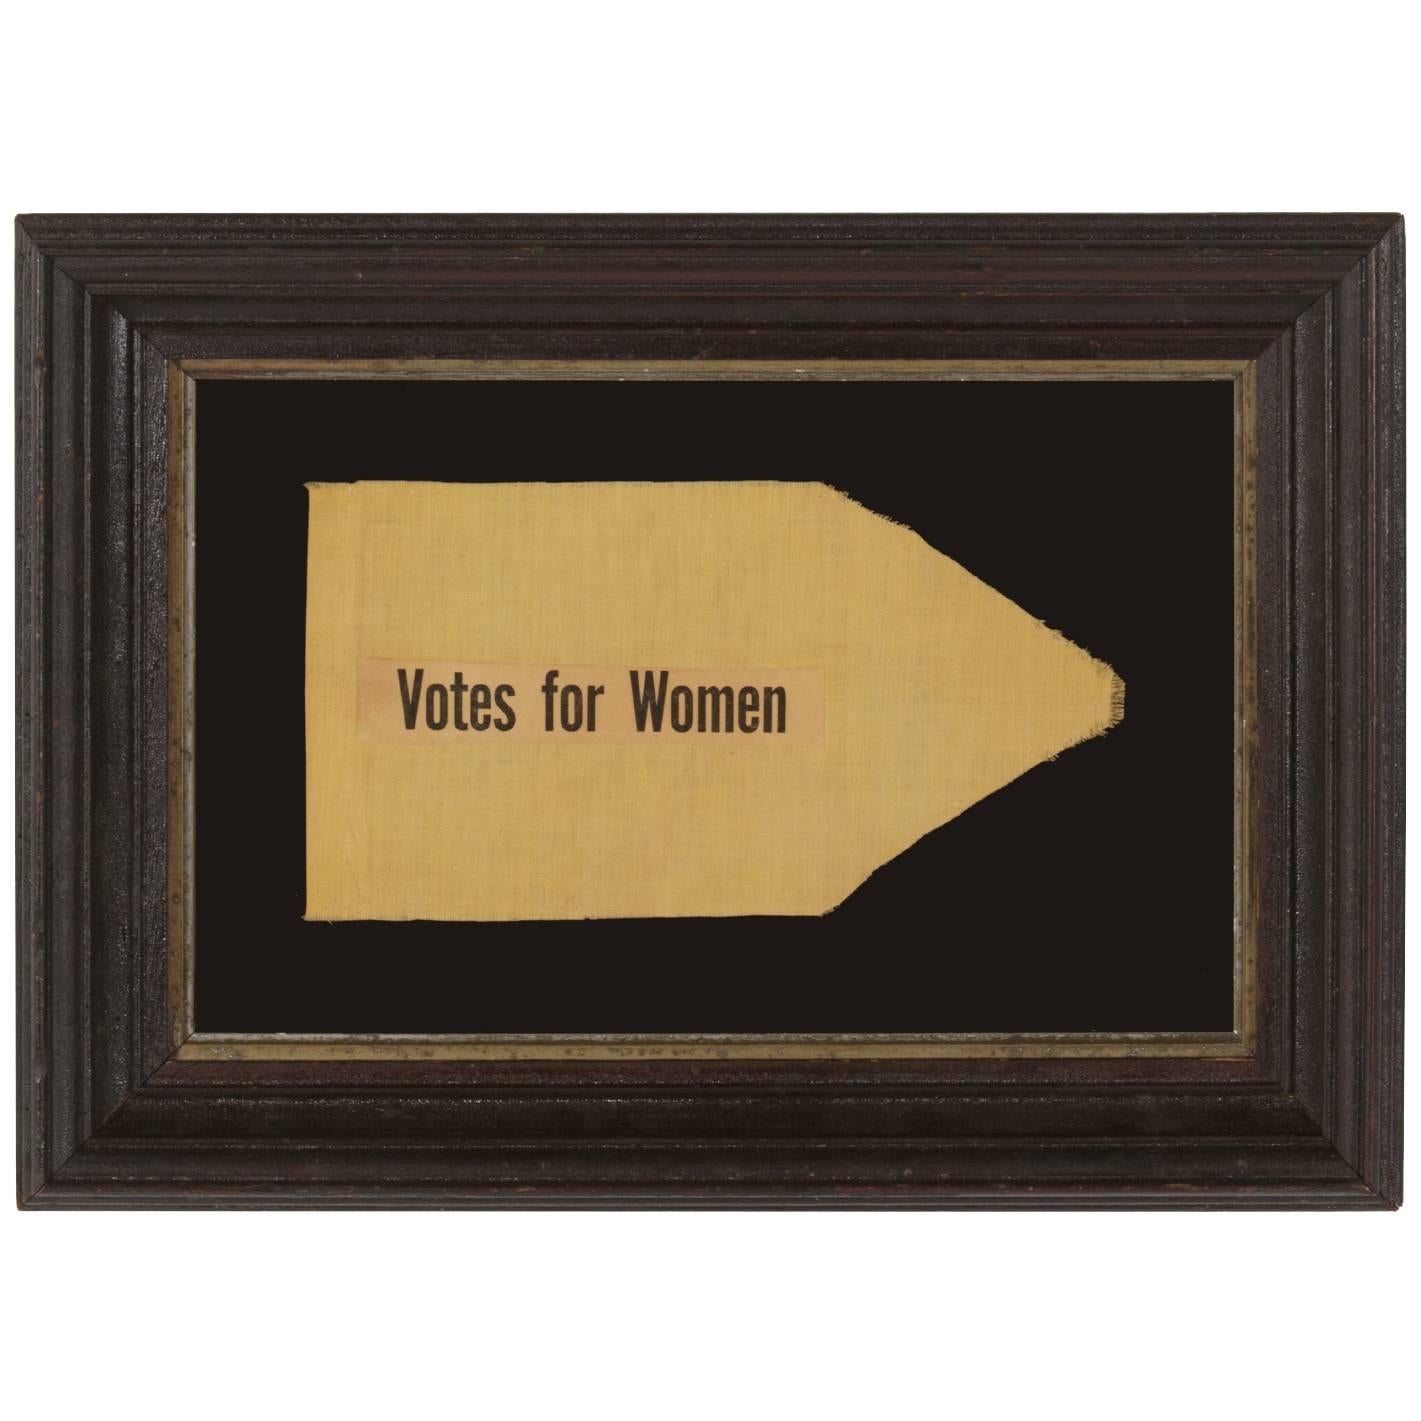 Small Suffragette Pennant with "Votes For Women" Text, 1910-1920